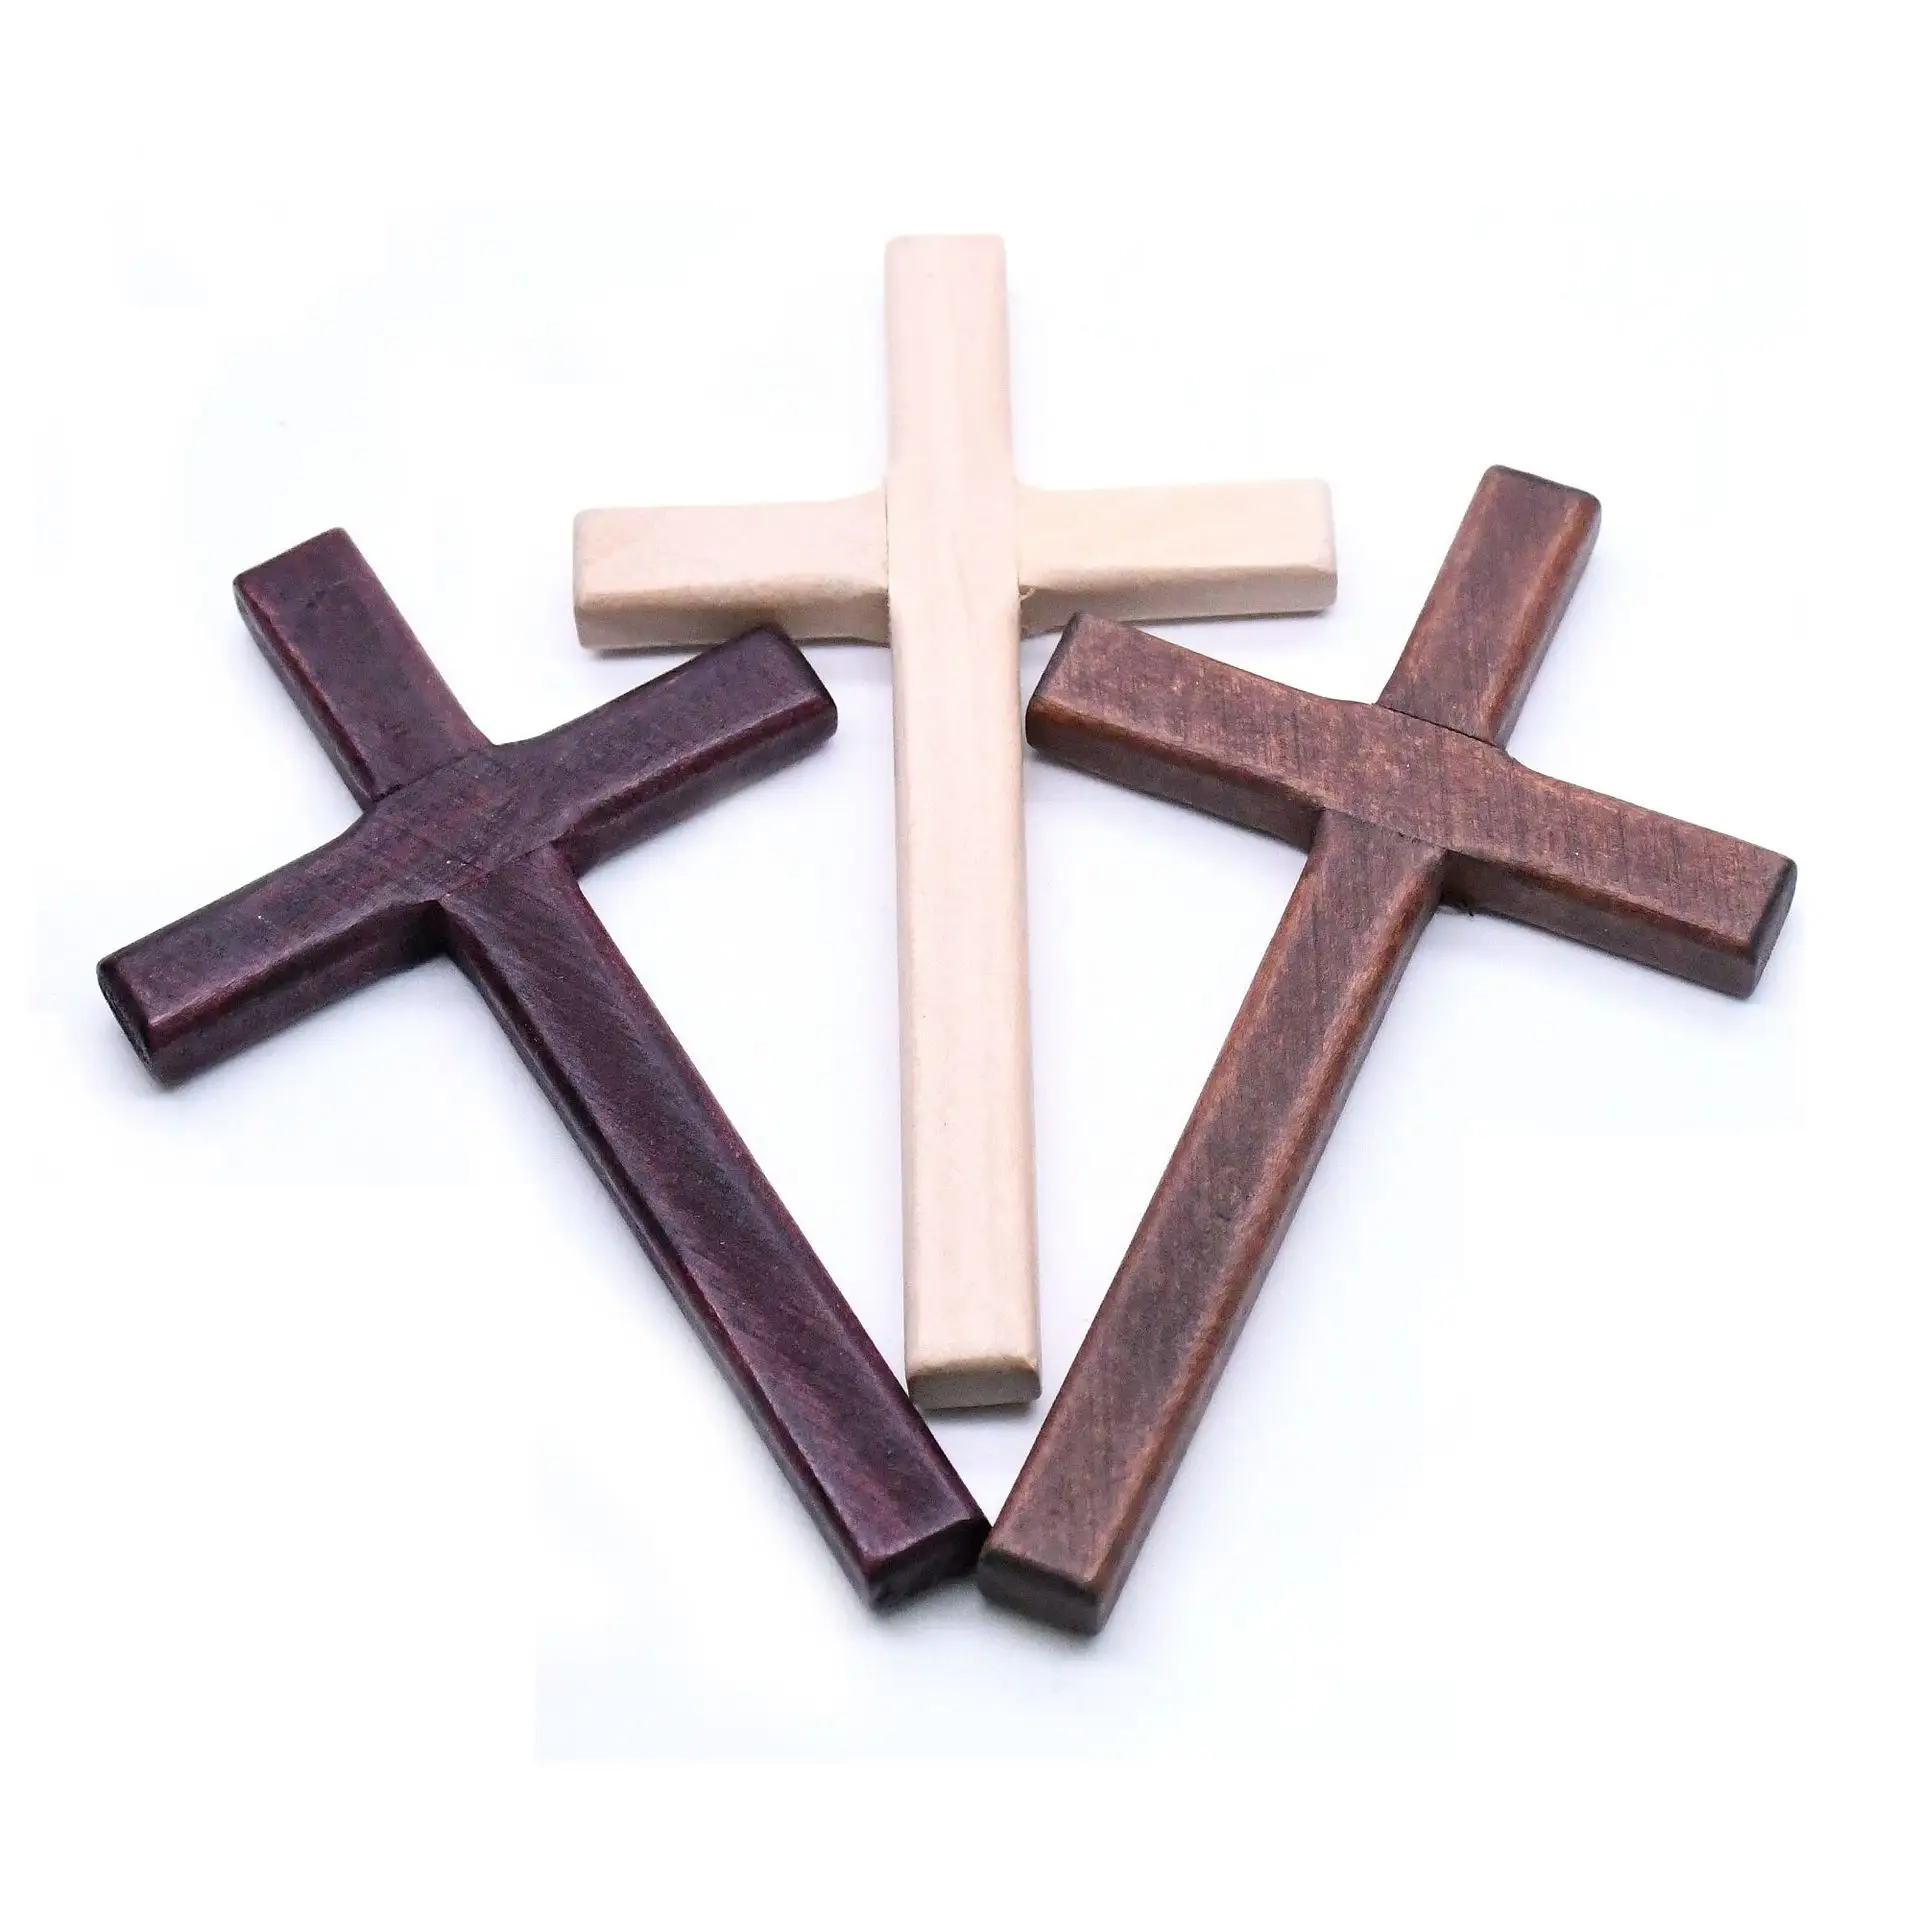 Solid Wood Carved Hand Holding Cross Religious Church Prayer Decor Crafts Crosses Small Wooden Factory Price Wholesale 7x12cm